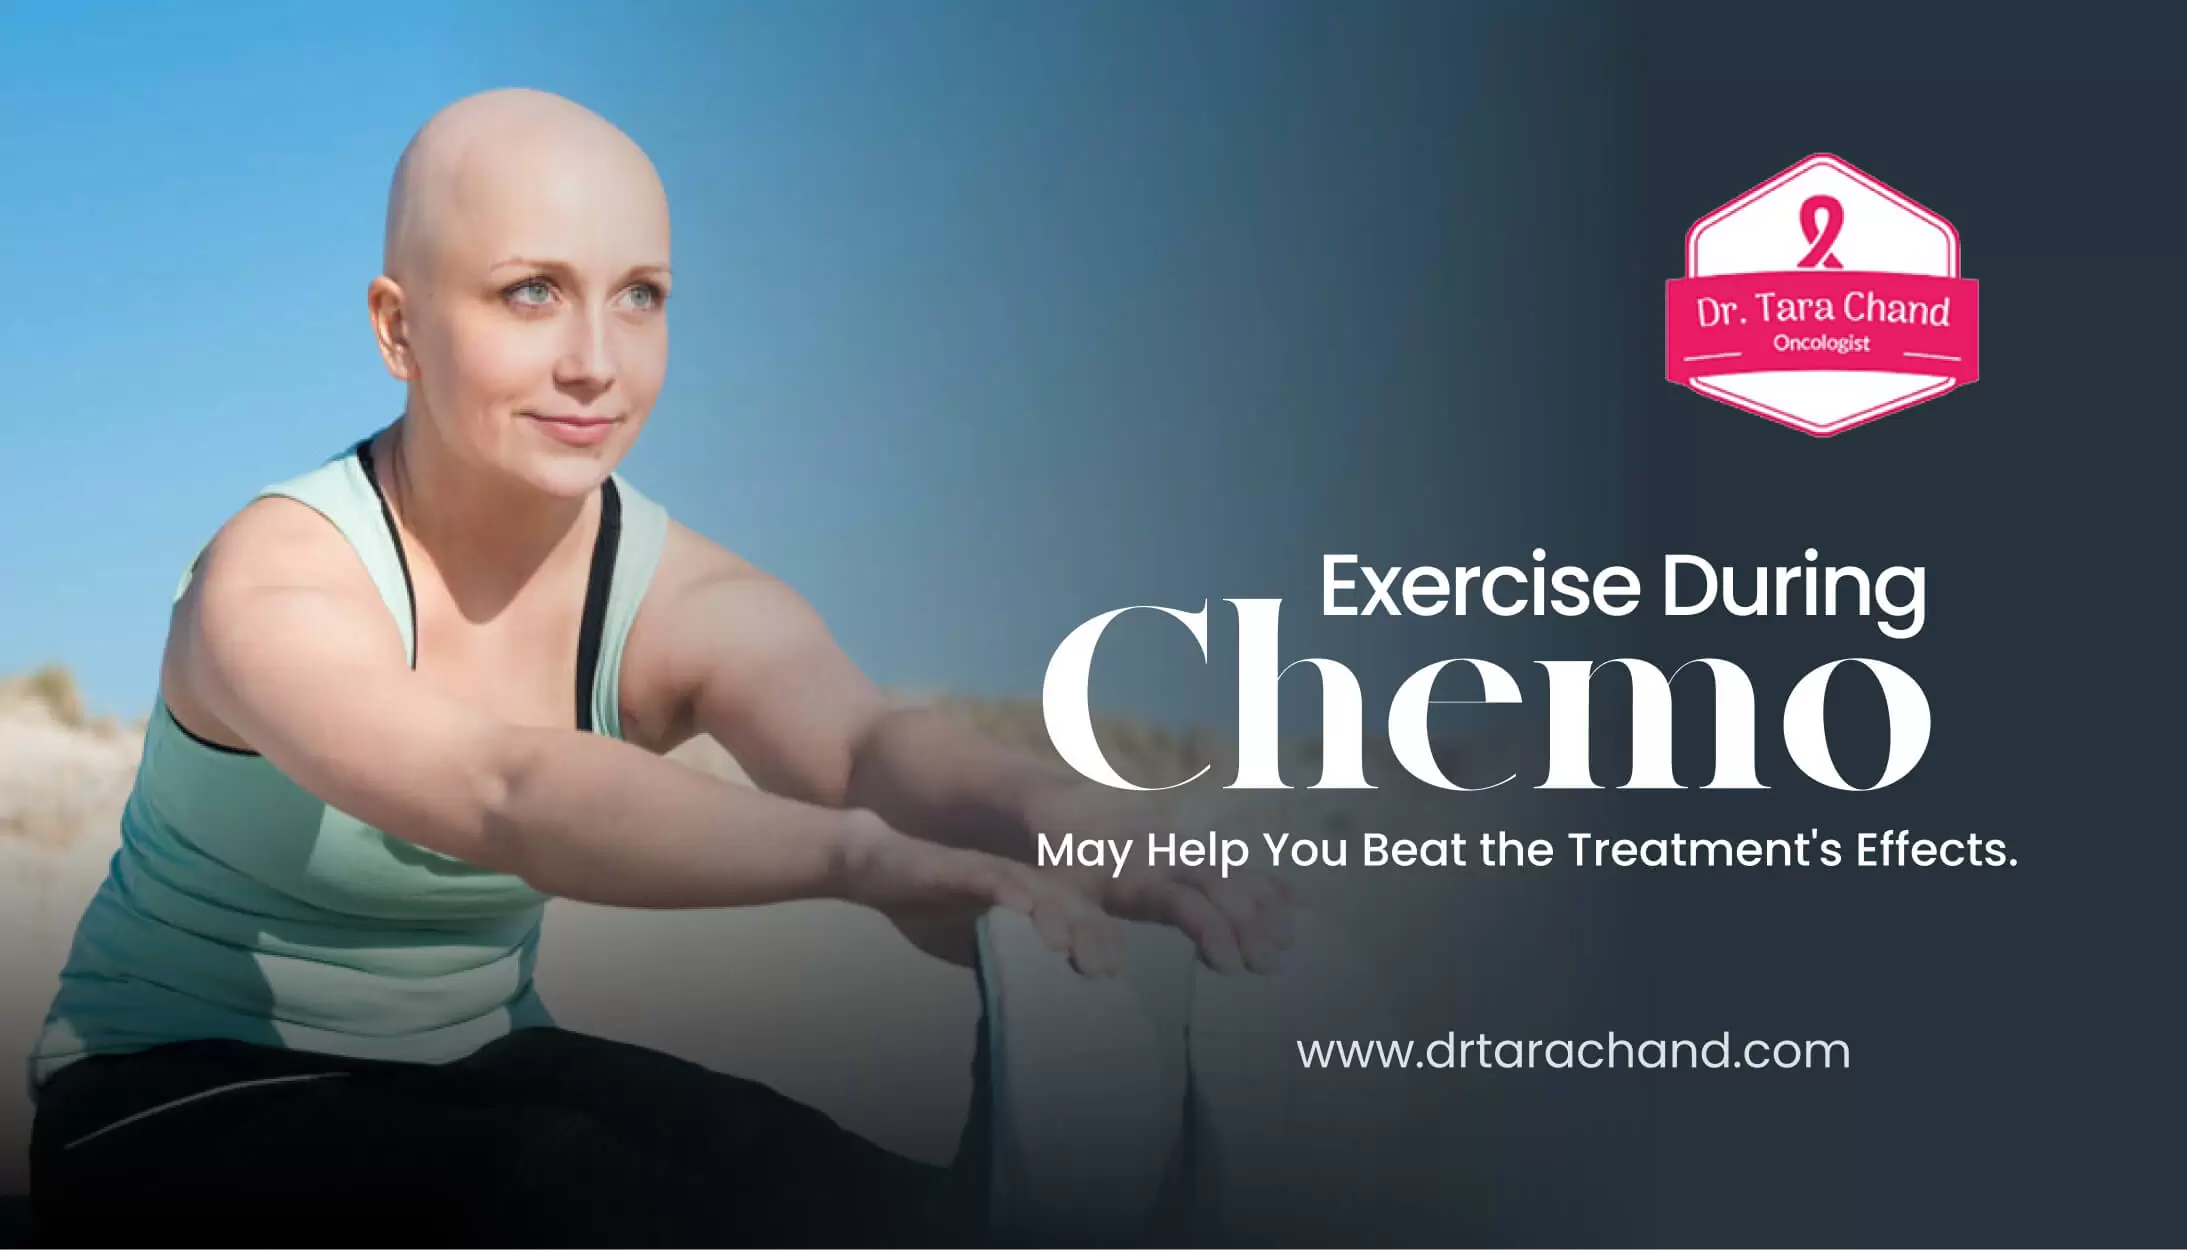 Exercise During Chemo May Help You Beat the Treatment’s Effects!